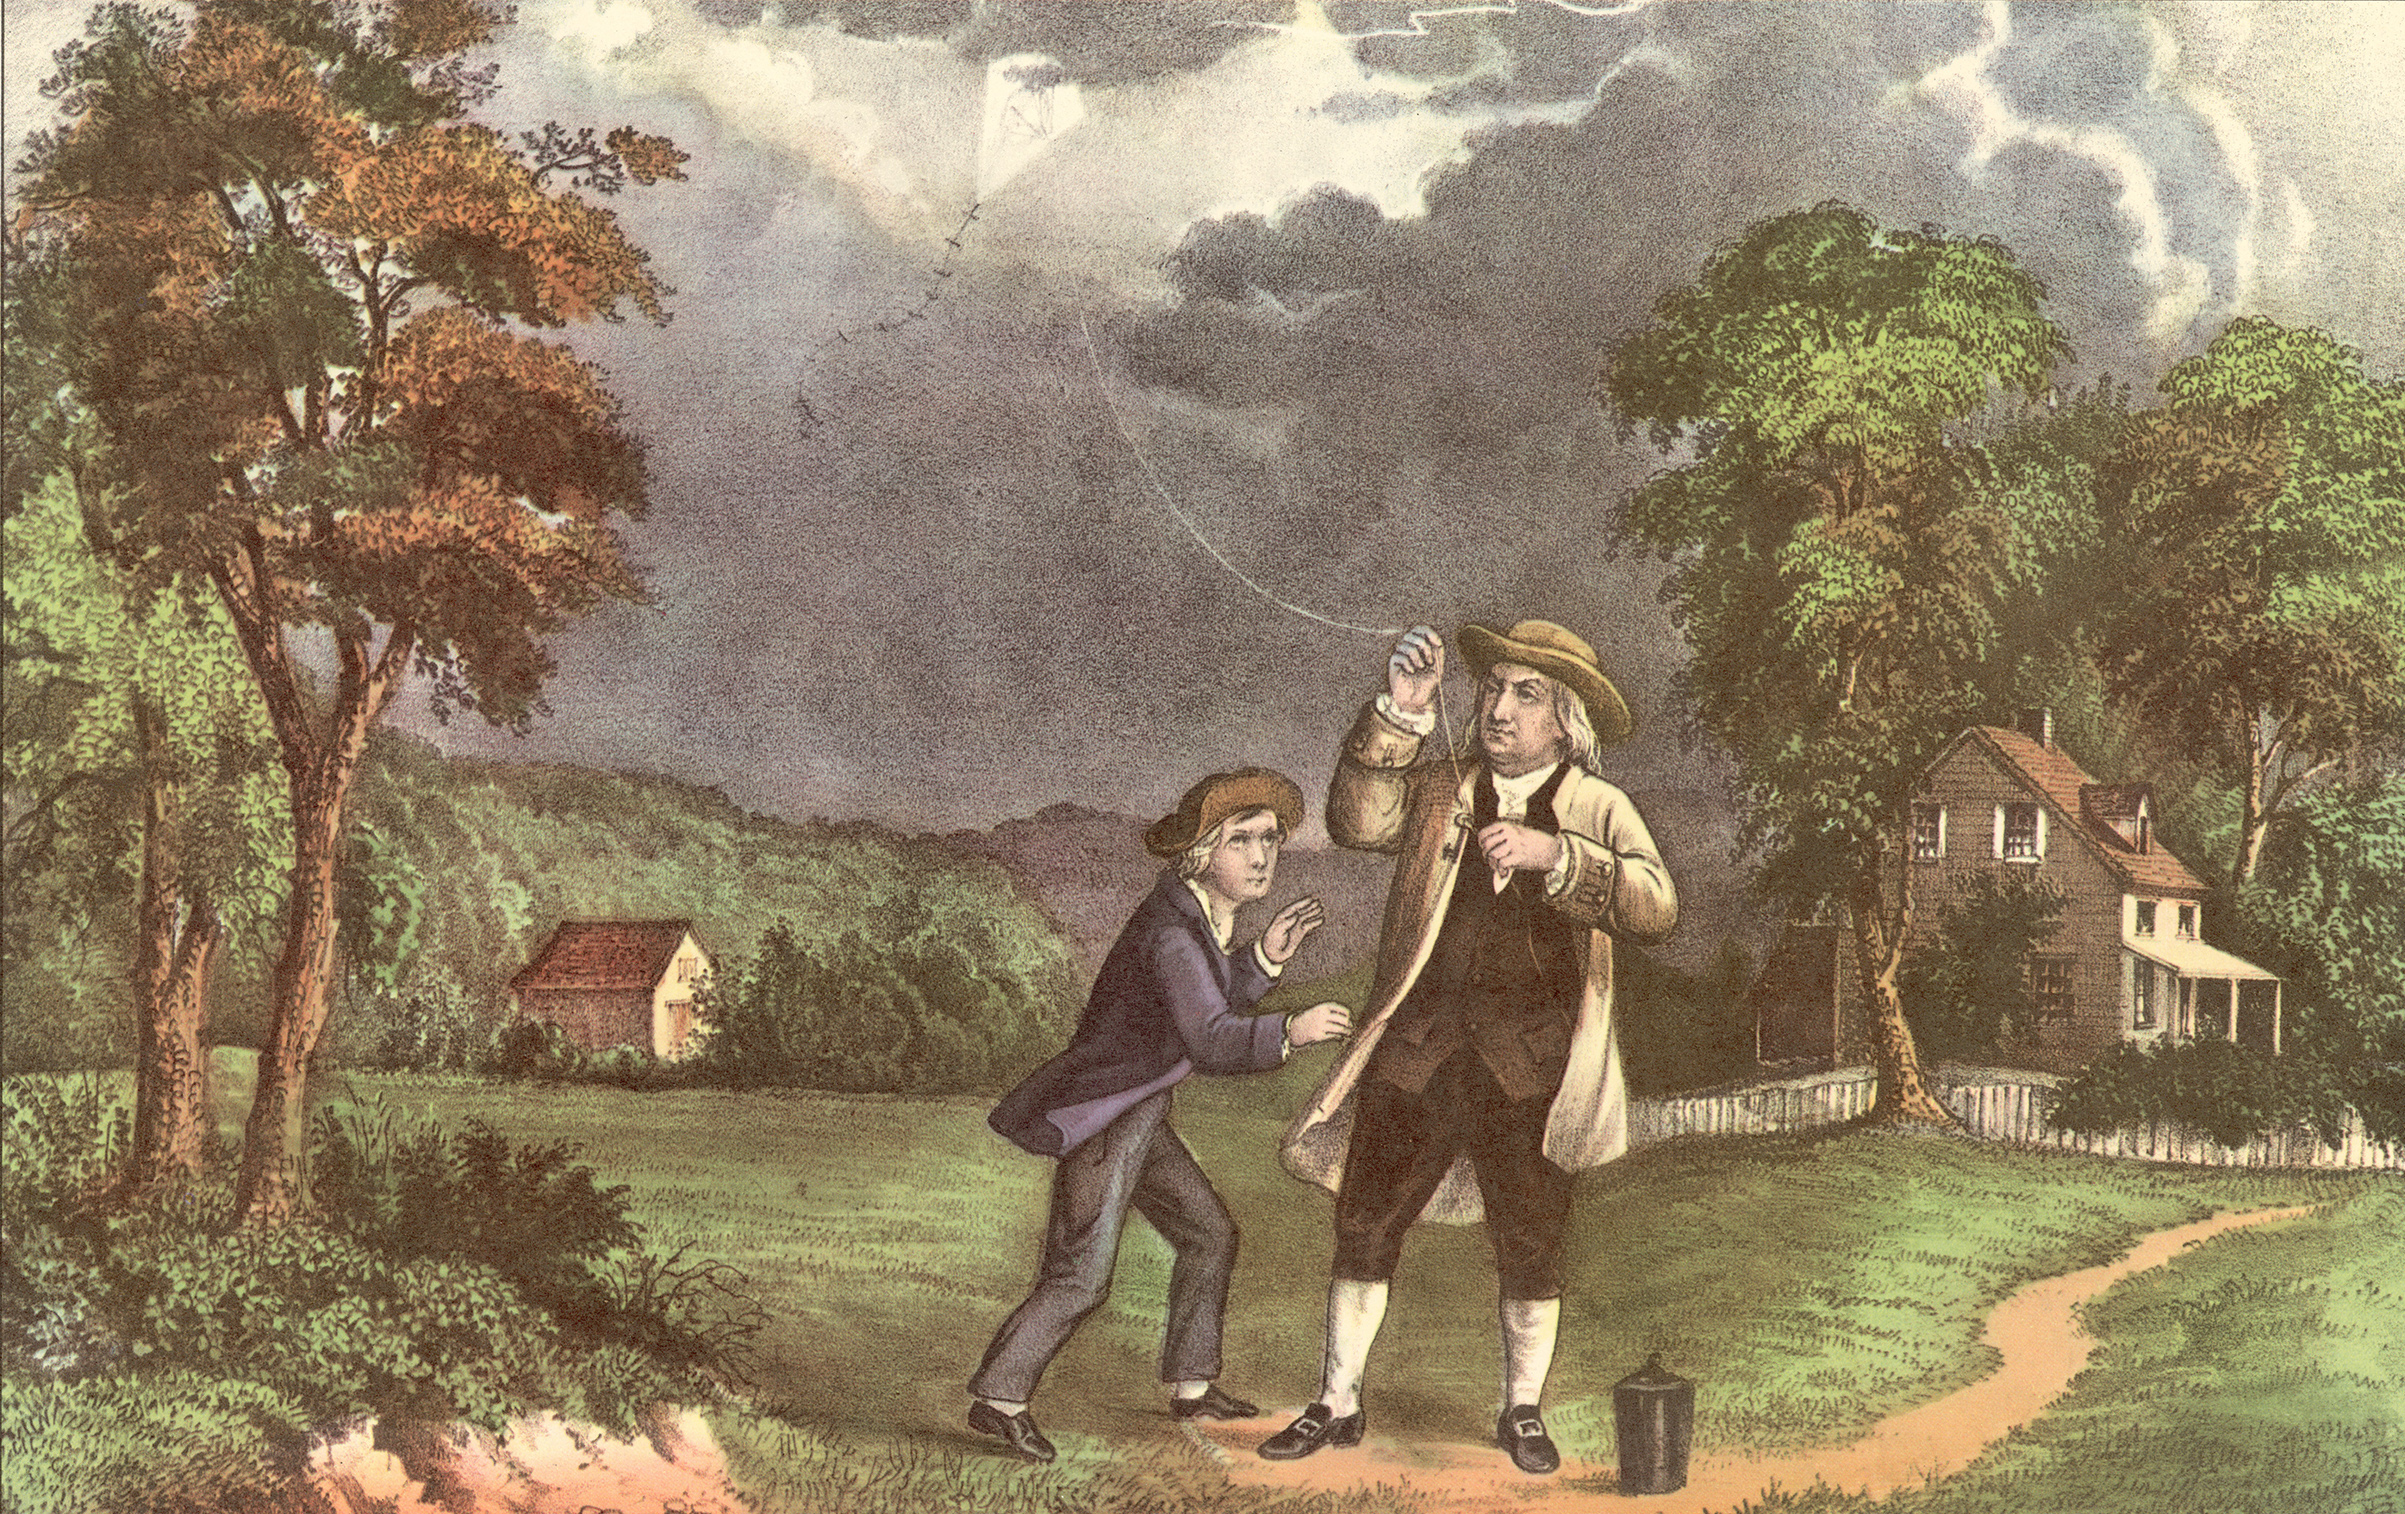 Benjamin Franklin and his son William used a key and a kite to prove that lightning was electricity (Hulton Archive/Getty Images)